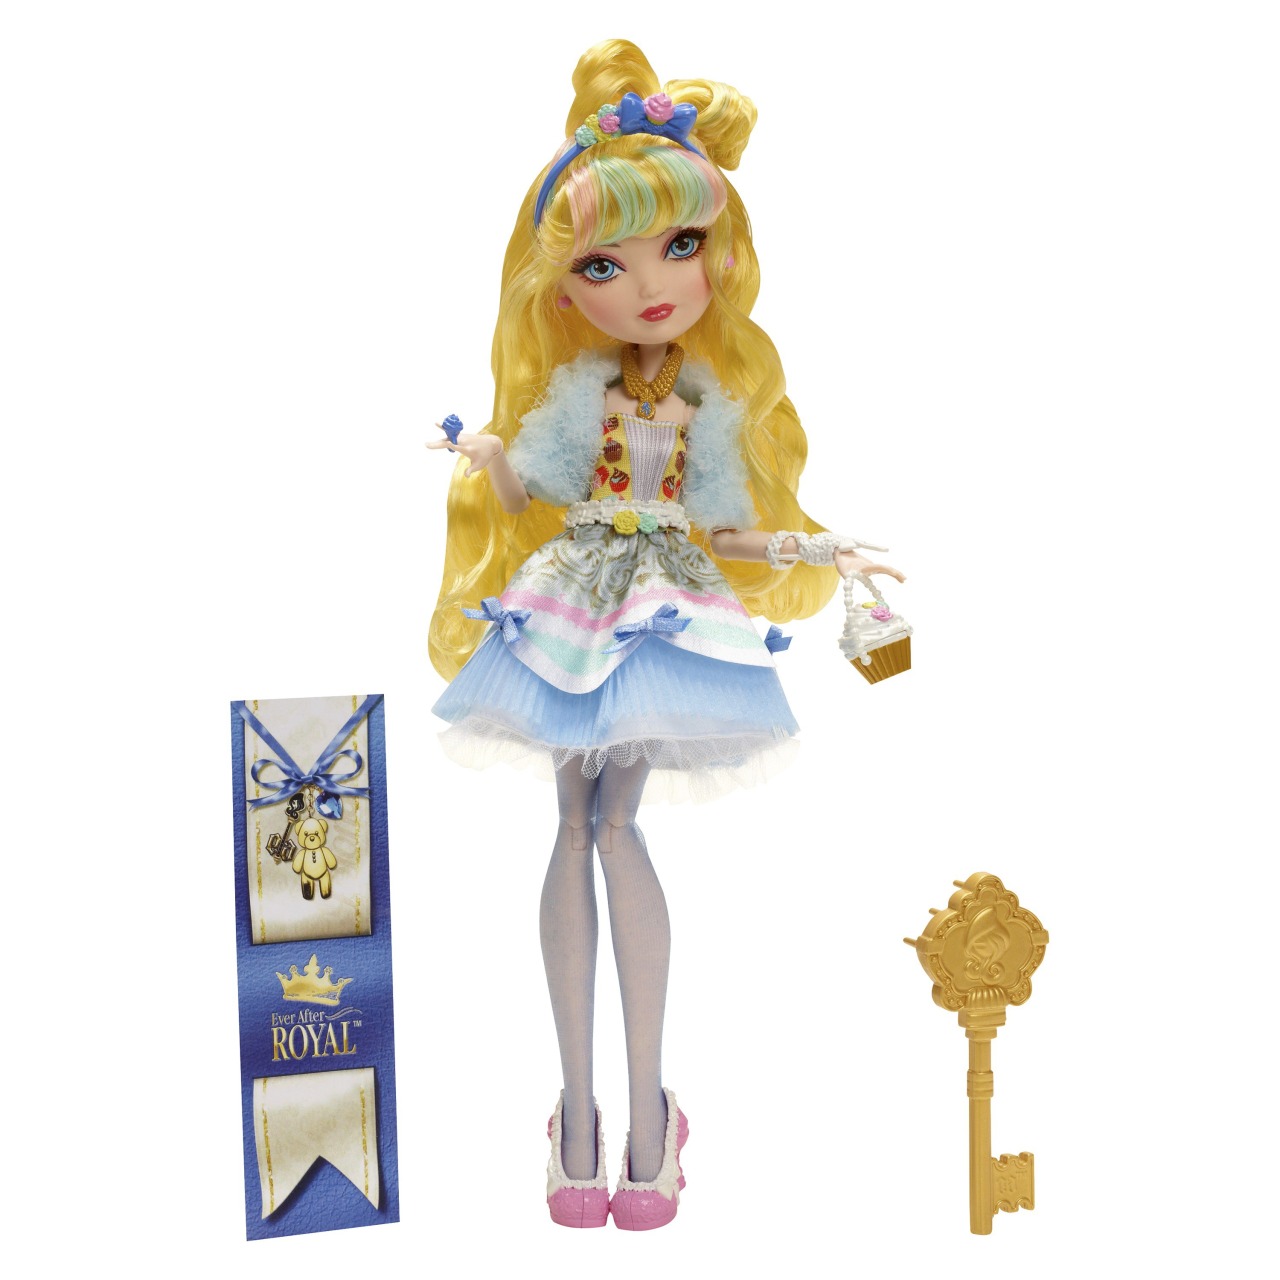 Just Sweet (doll assortment) | Ever After High Wiki | FANDOM powered by